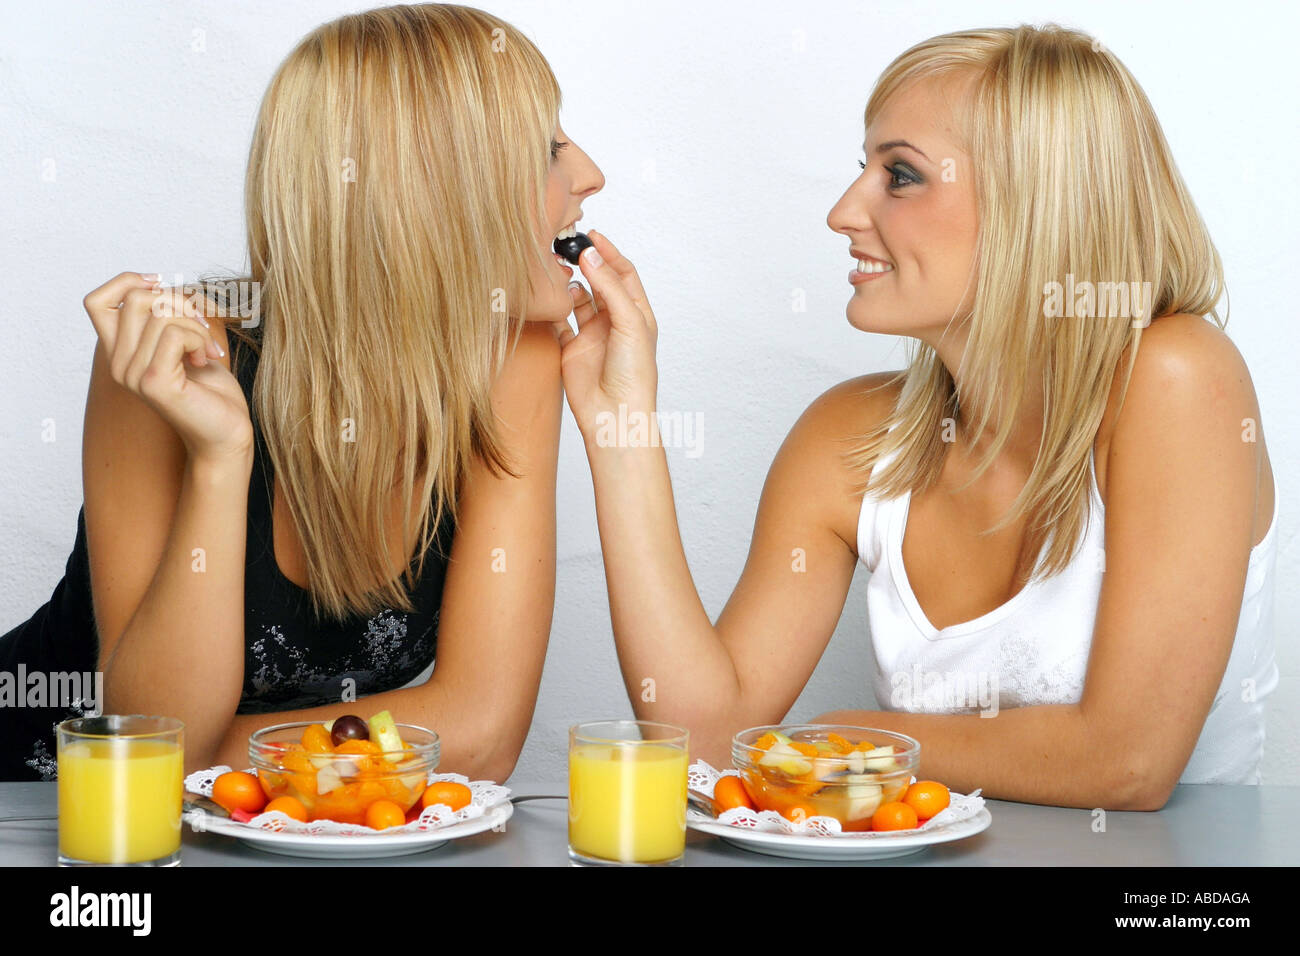 Blond twins feed themselves with fruit salad Stock Photo